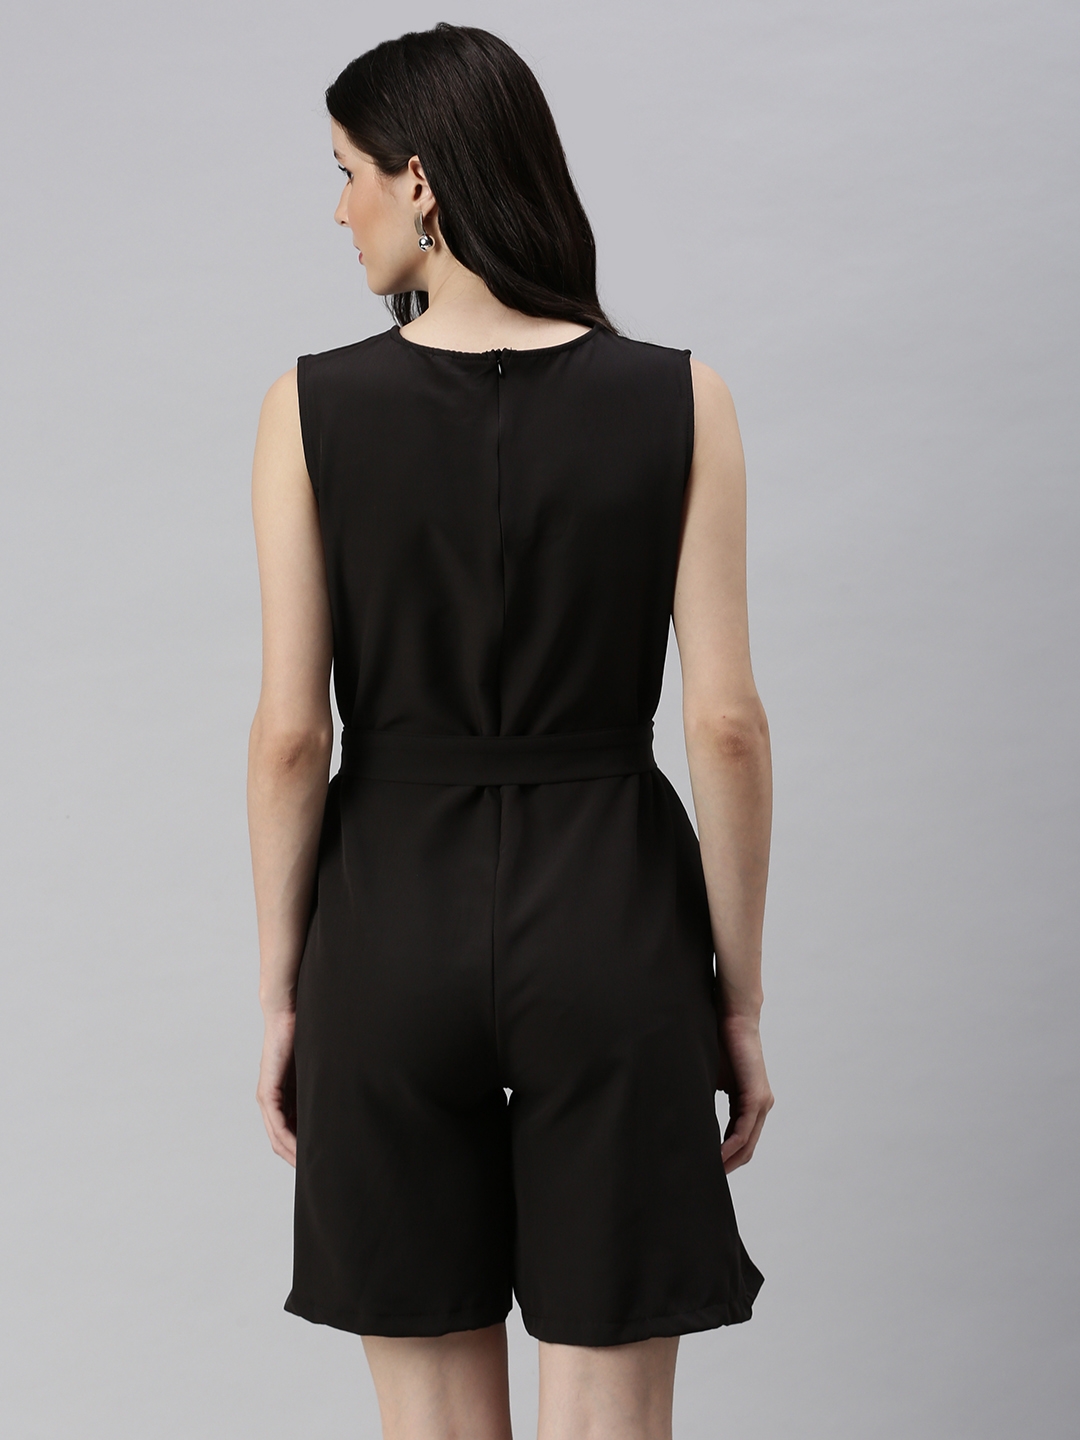 Women's Black Polyester Solid Jumpsuits